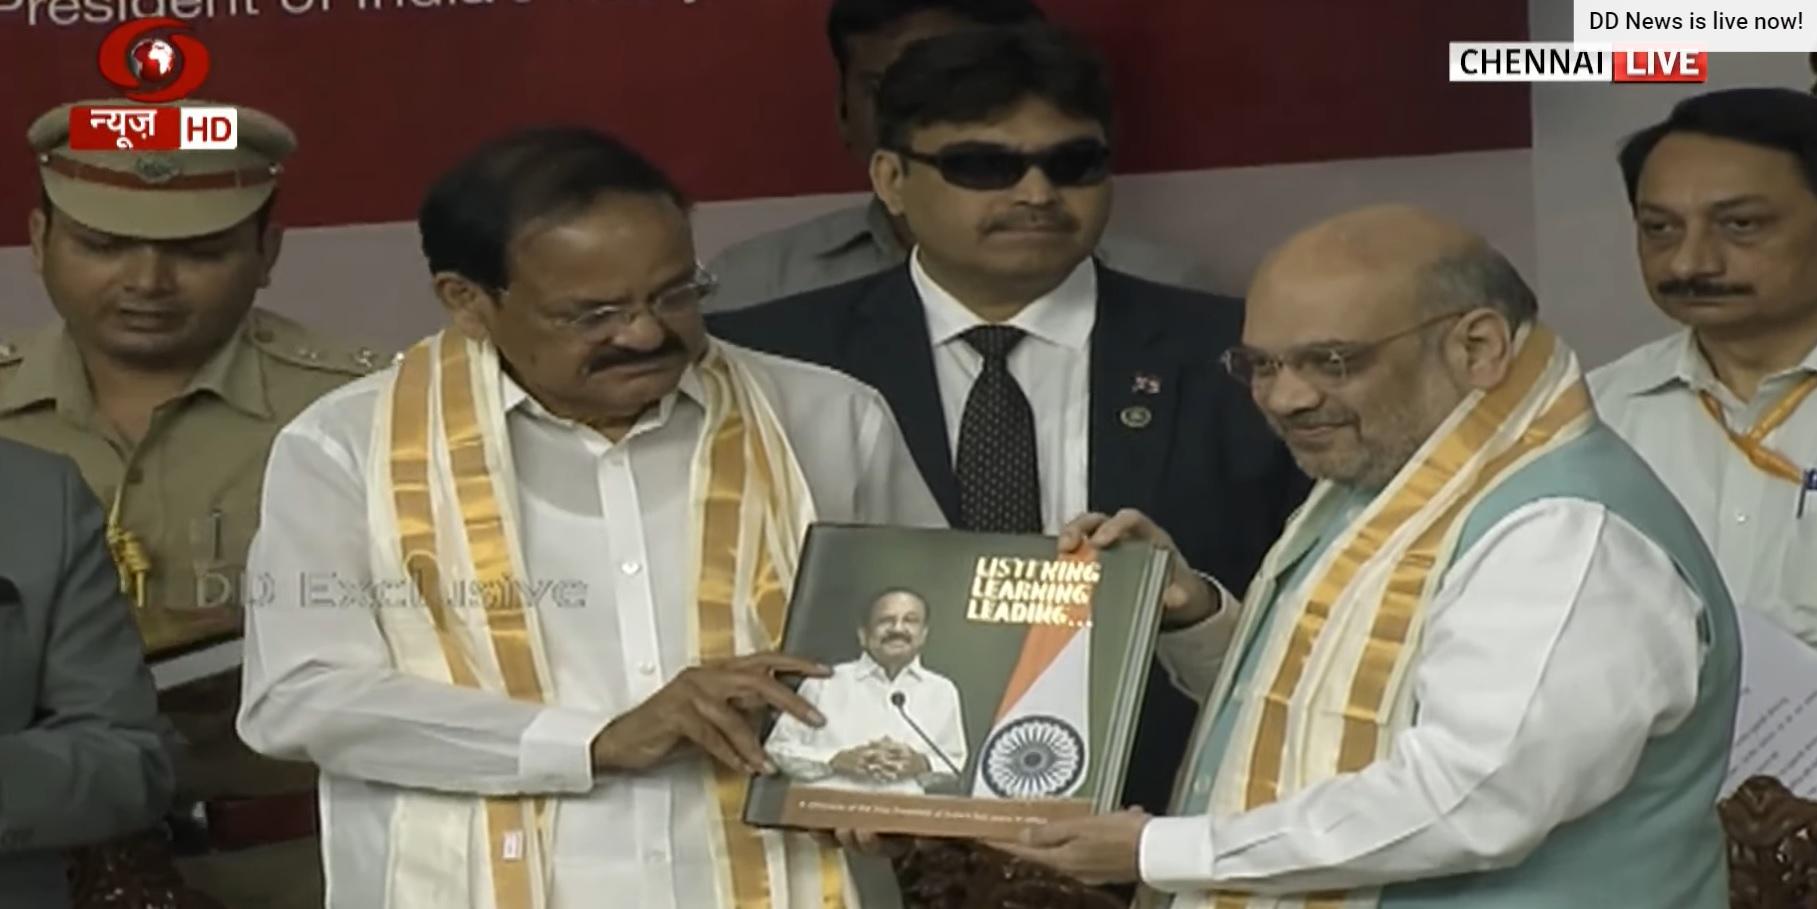 Vice President's book titled "Listening, Learning & Leading" released_40.1